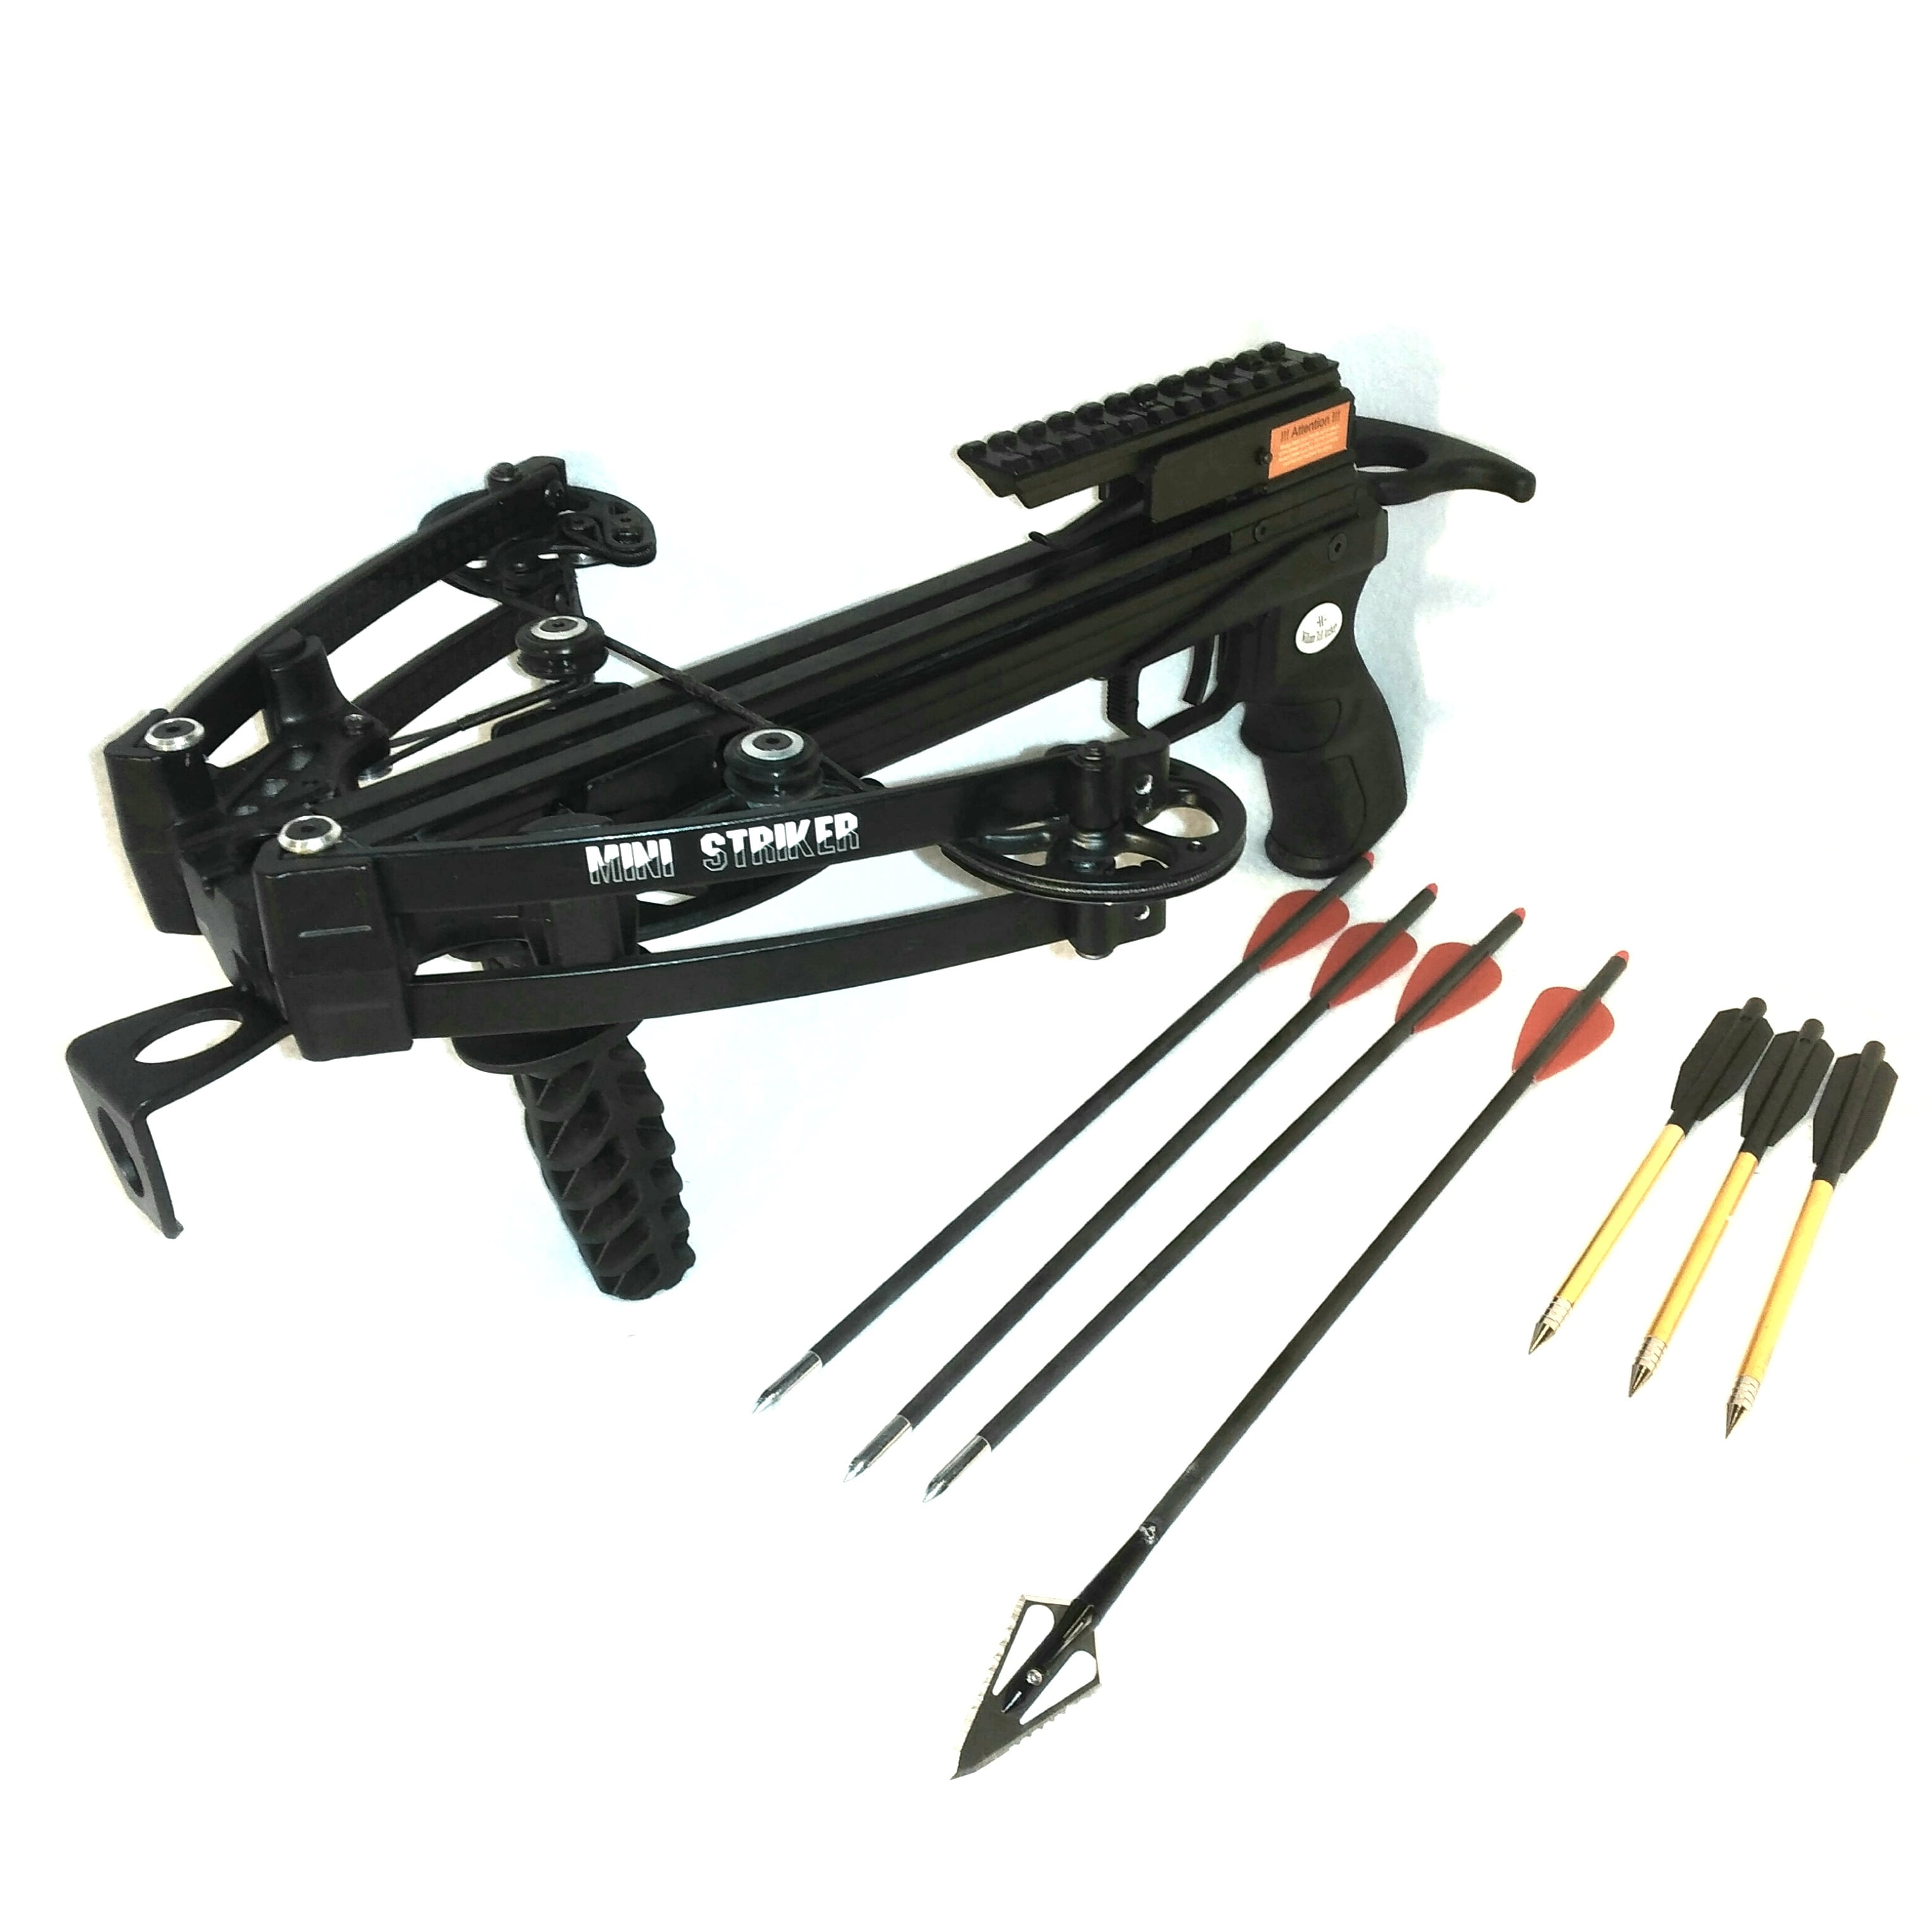 320 FPS MINI Crossbow with hunting arrow 